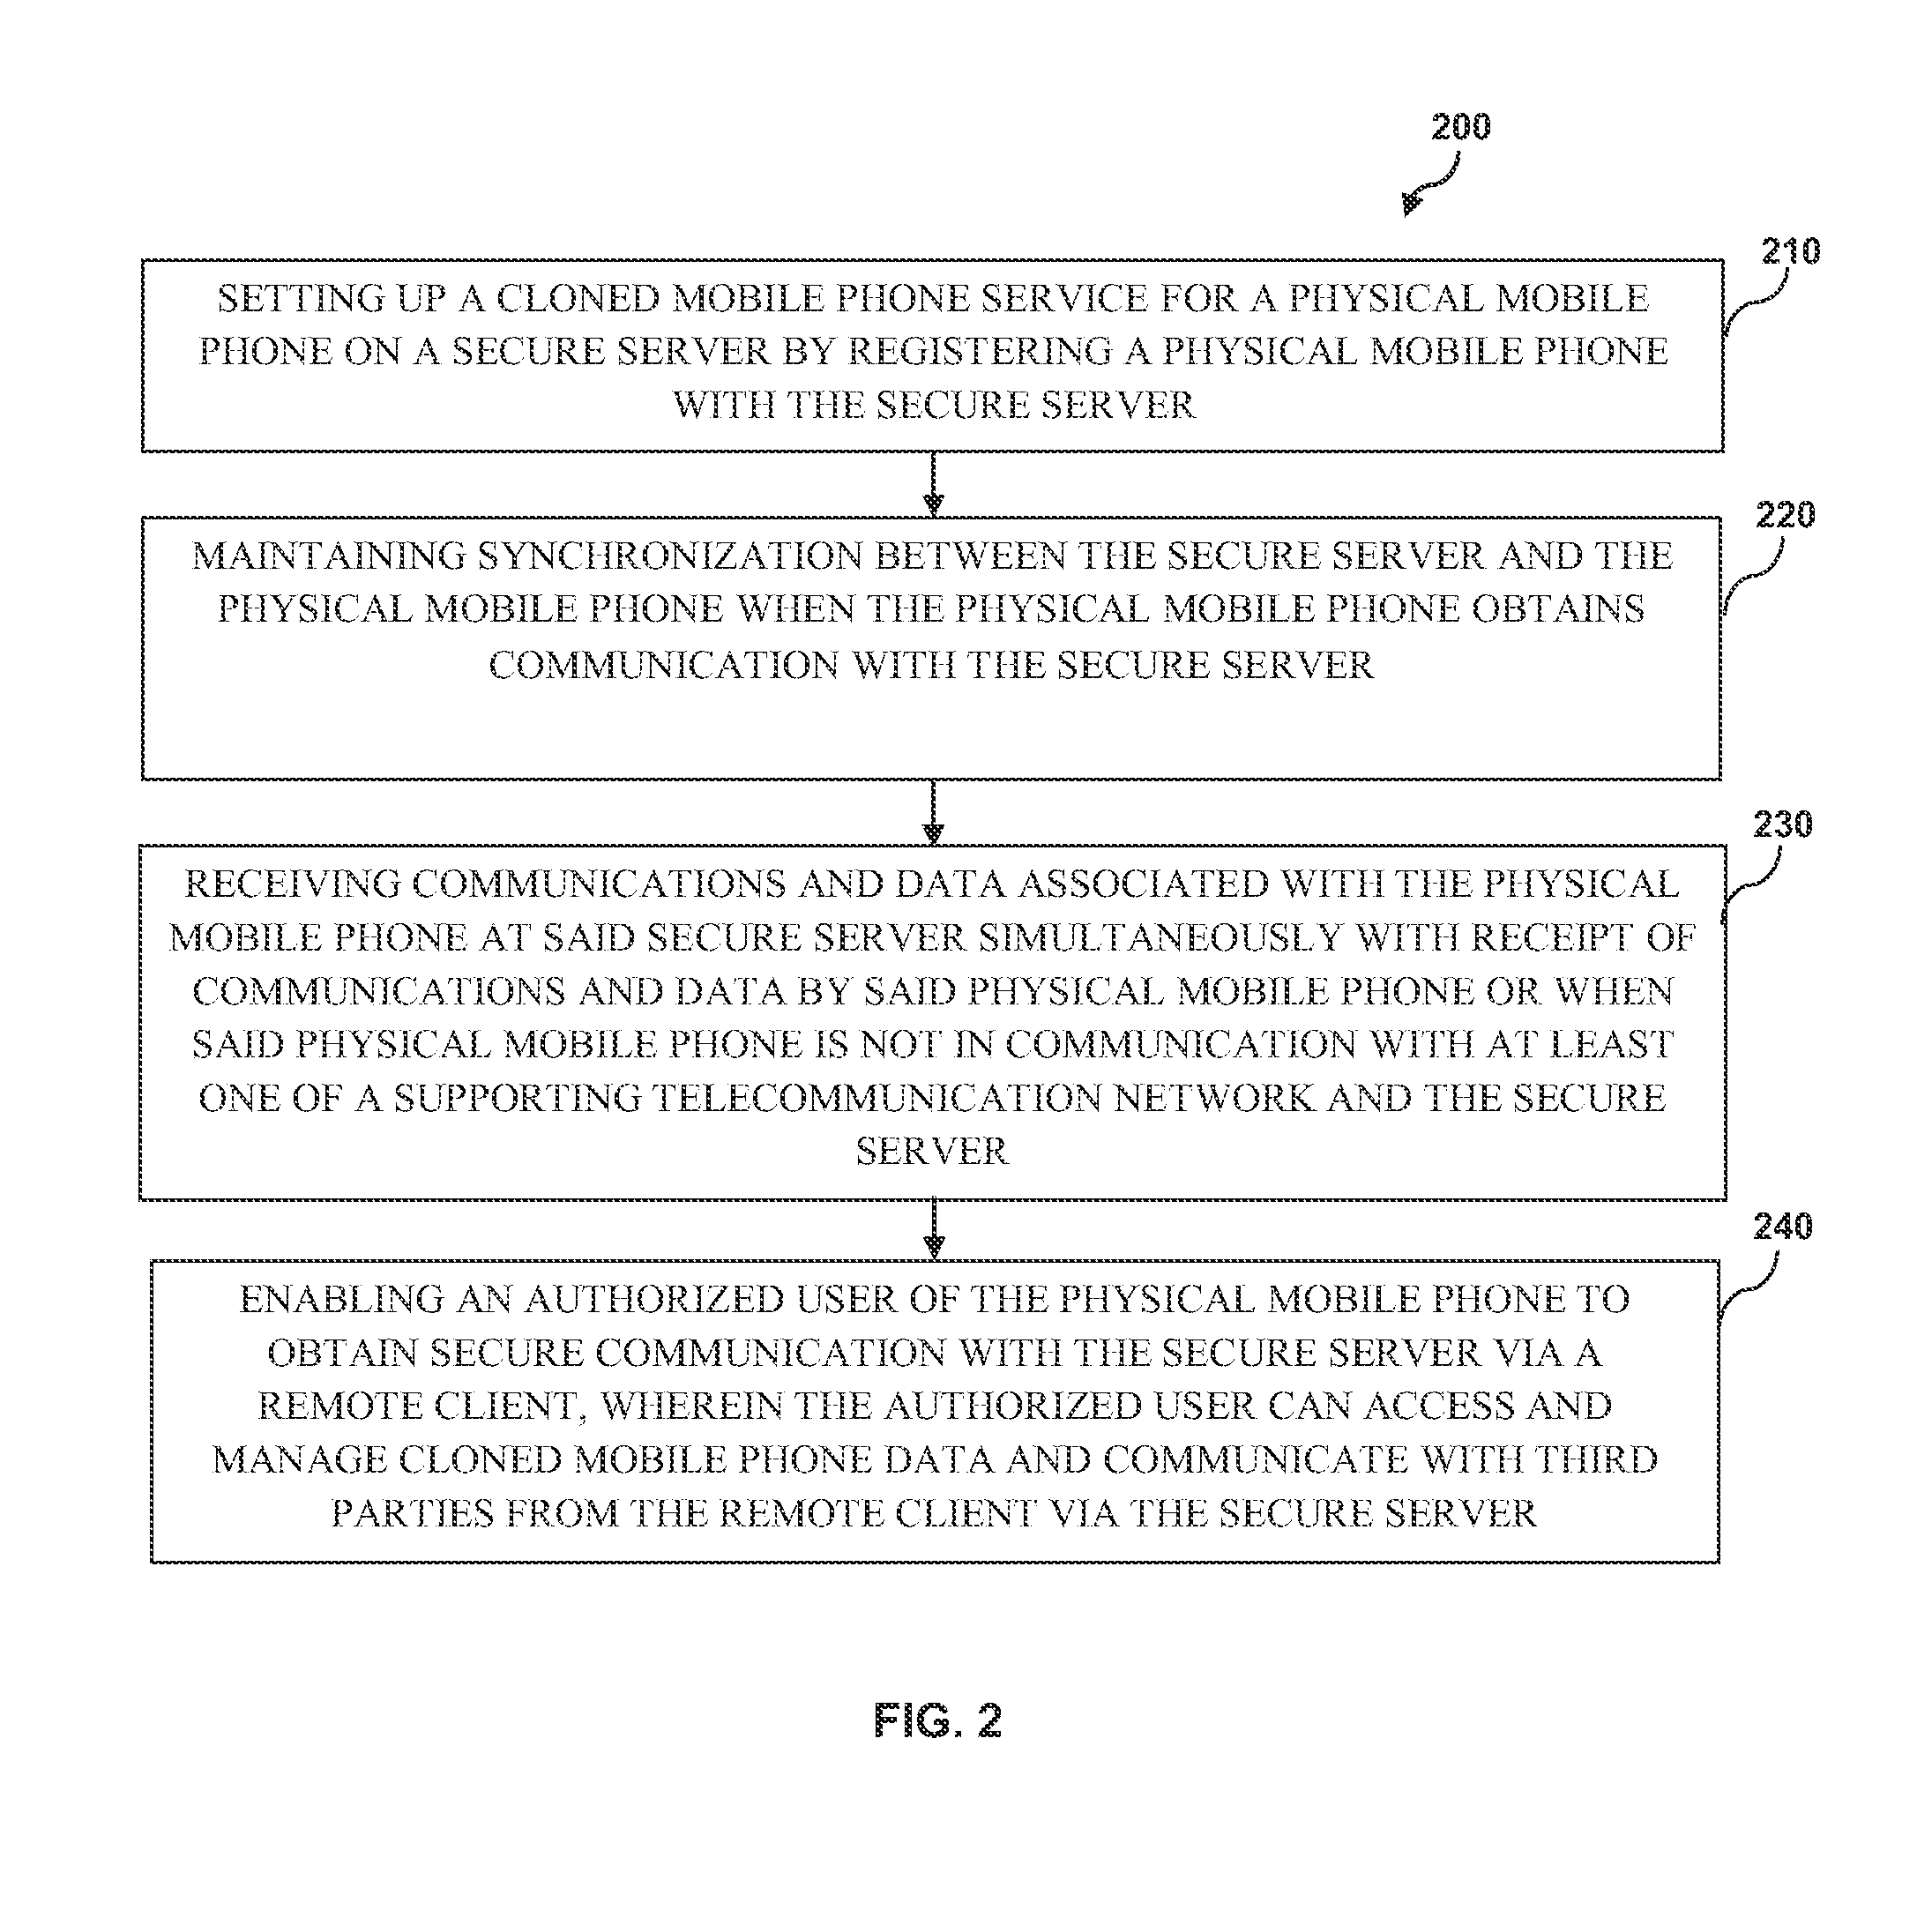 Systems and methods for enabling temporary, user-authorized cloning of mobile phone functionality on a secure server accessible via a remote client